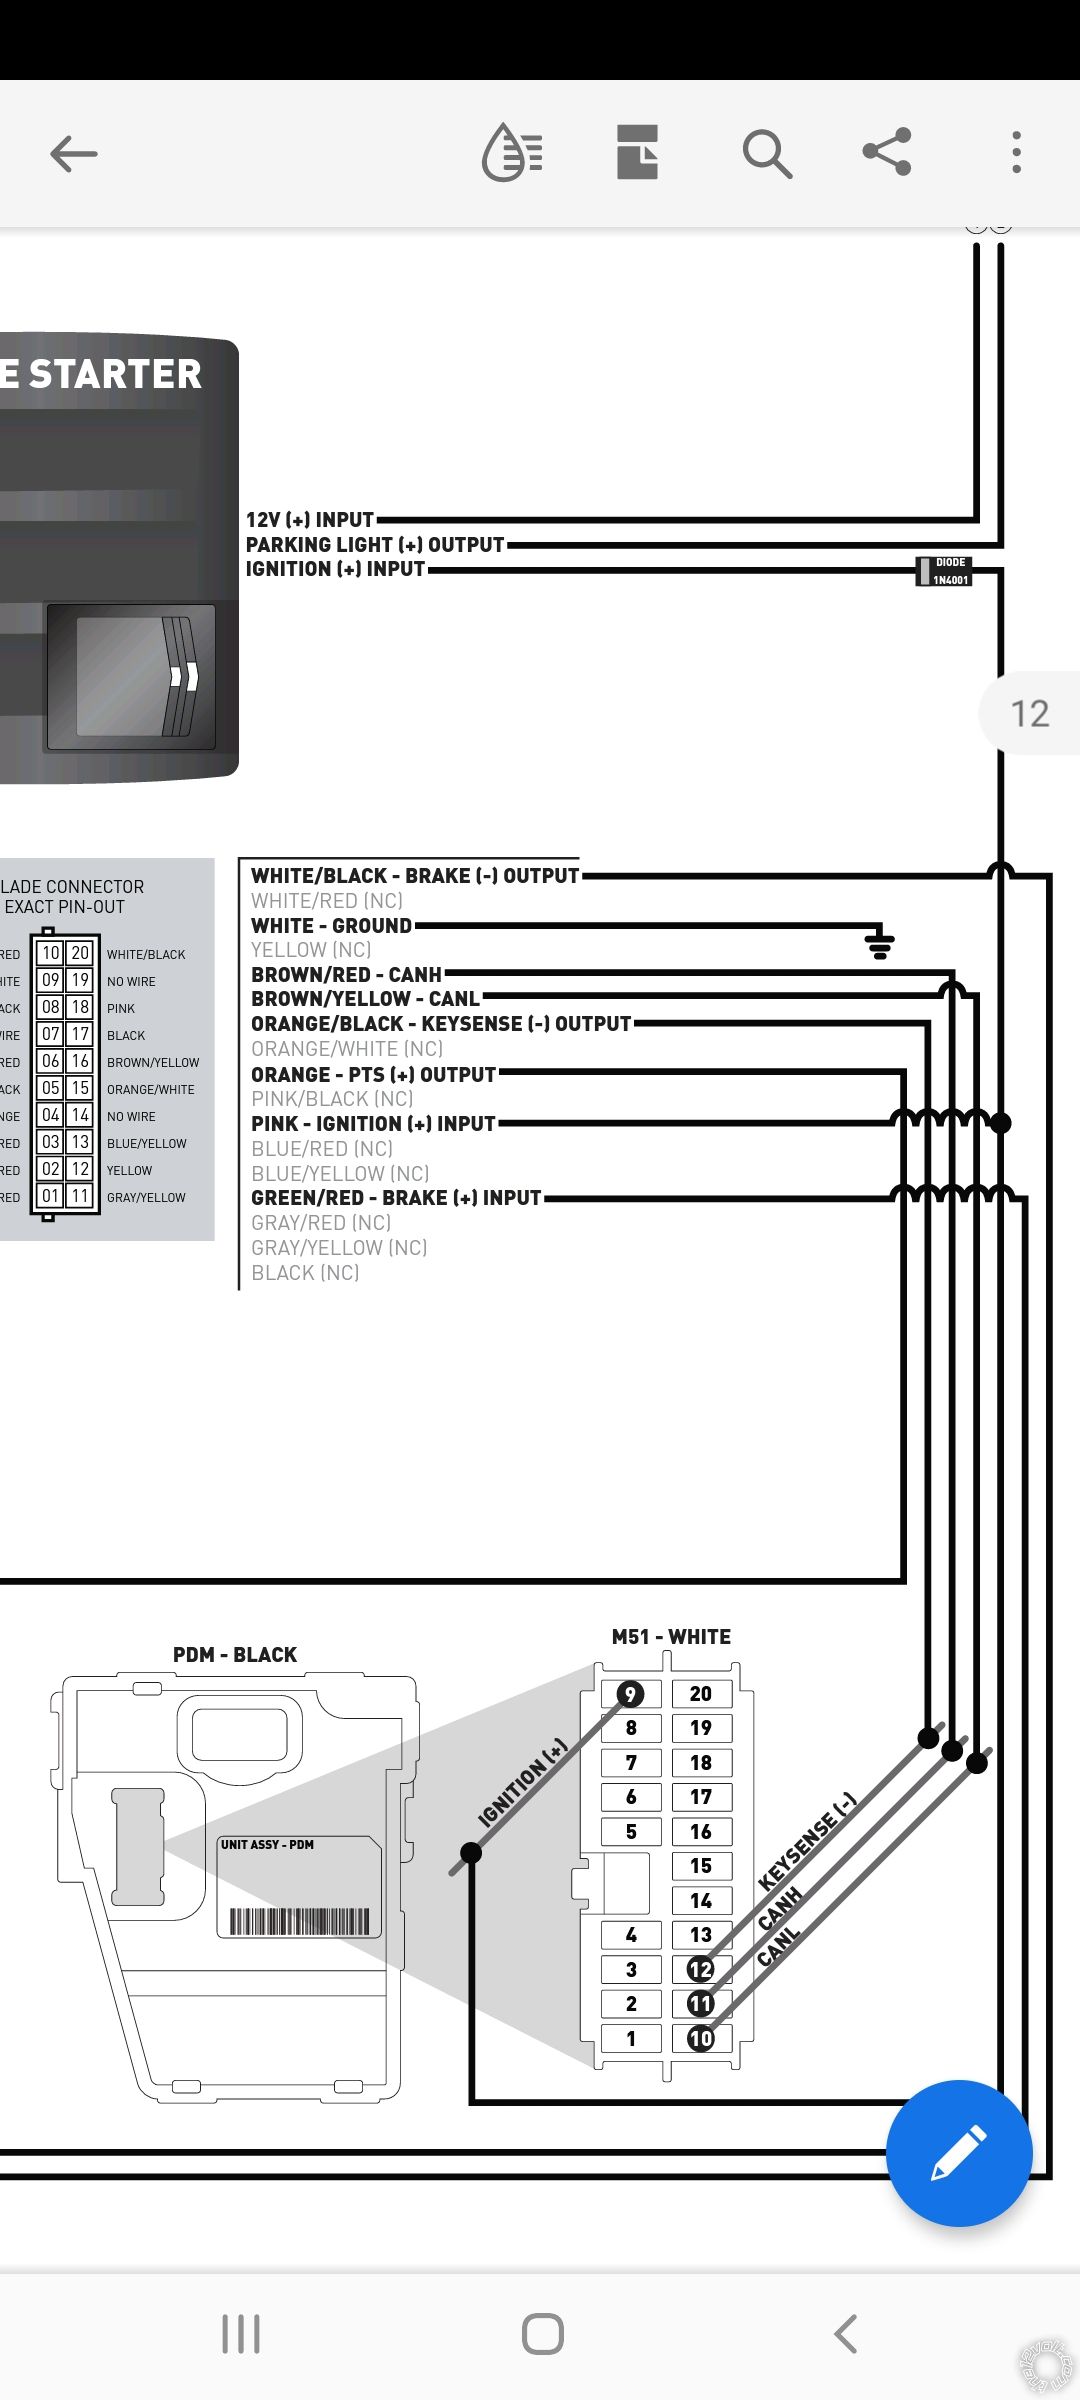 Remote Start Brake Switch Relay -- posted image.